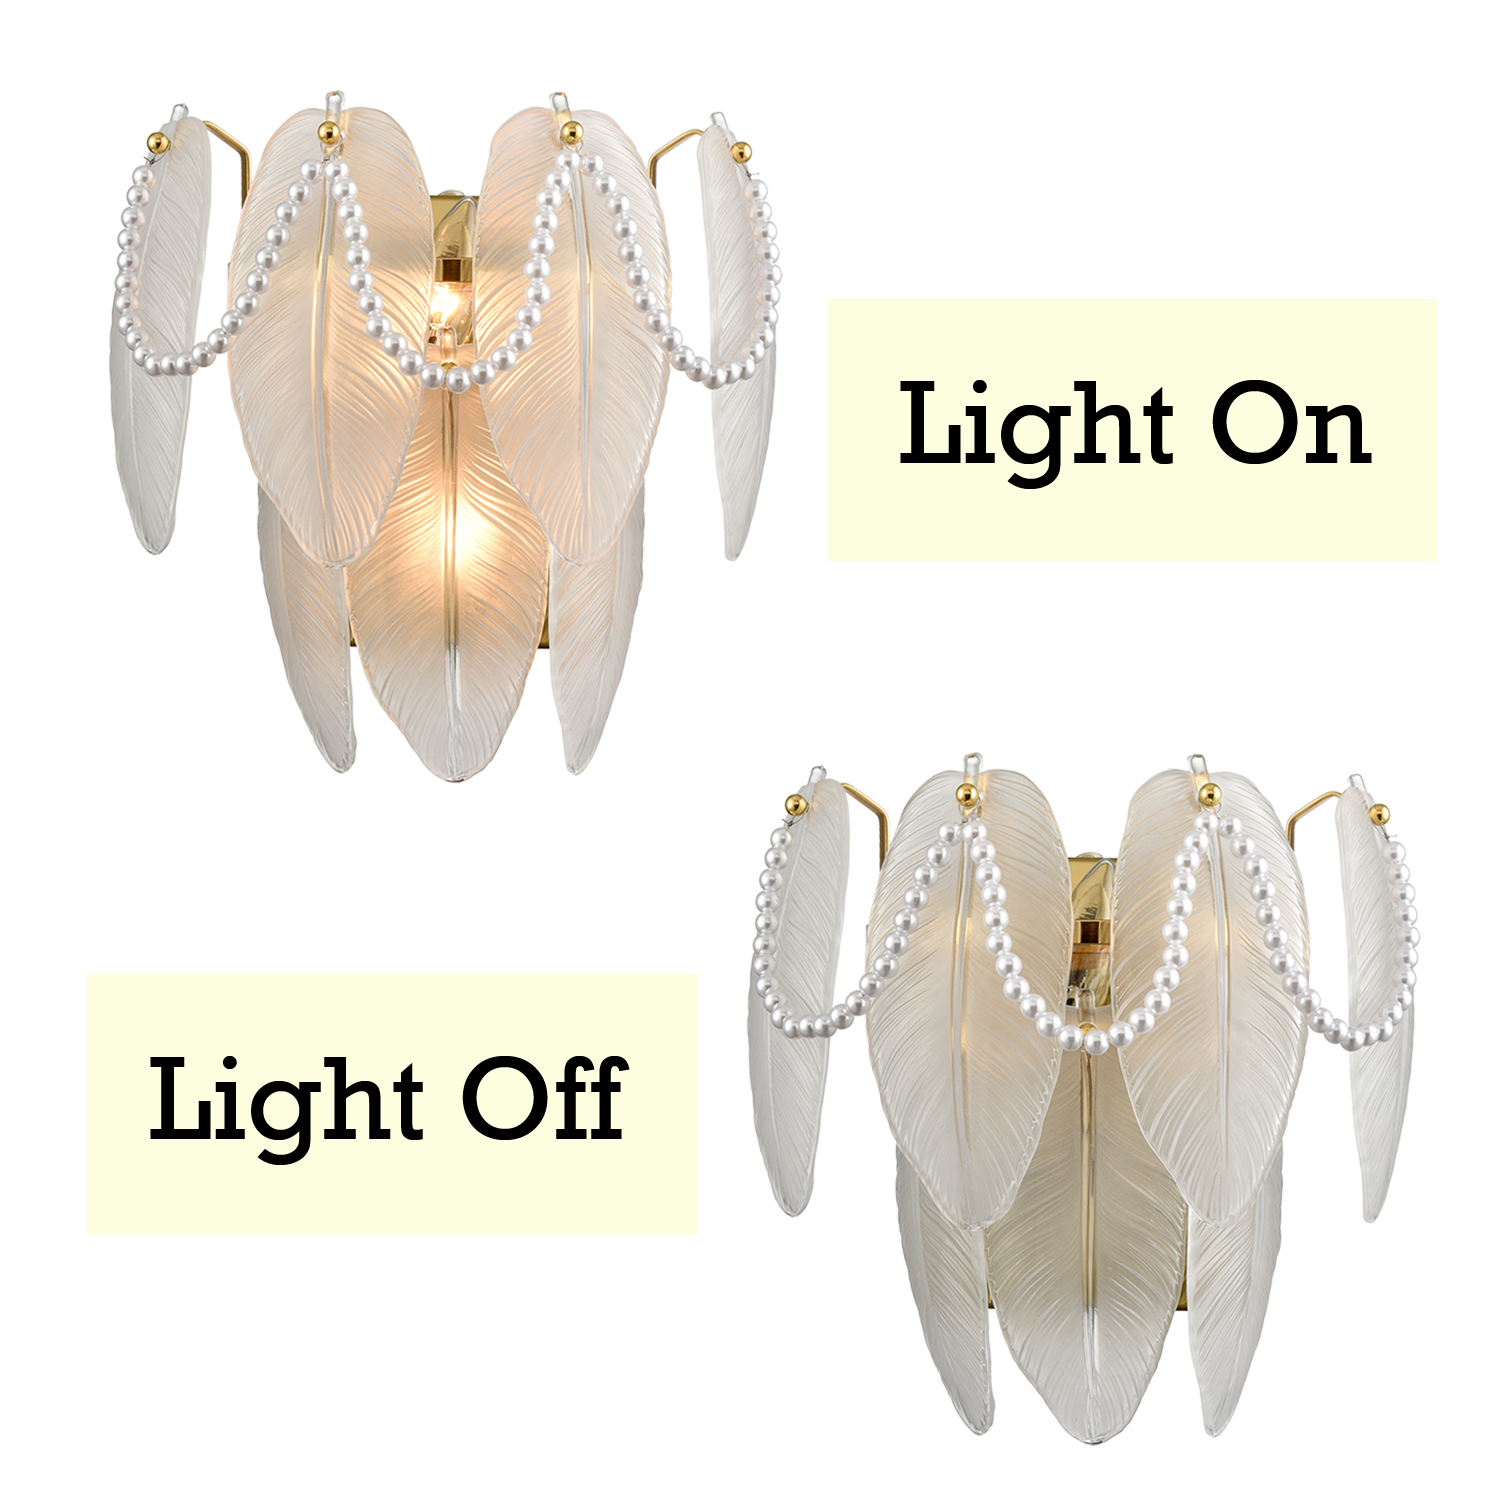 Vintage Wall Light Retro Wall Sconce 2-Light with Leaf Shape Frosted Glass and White Beads